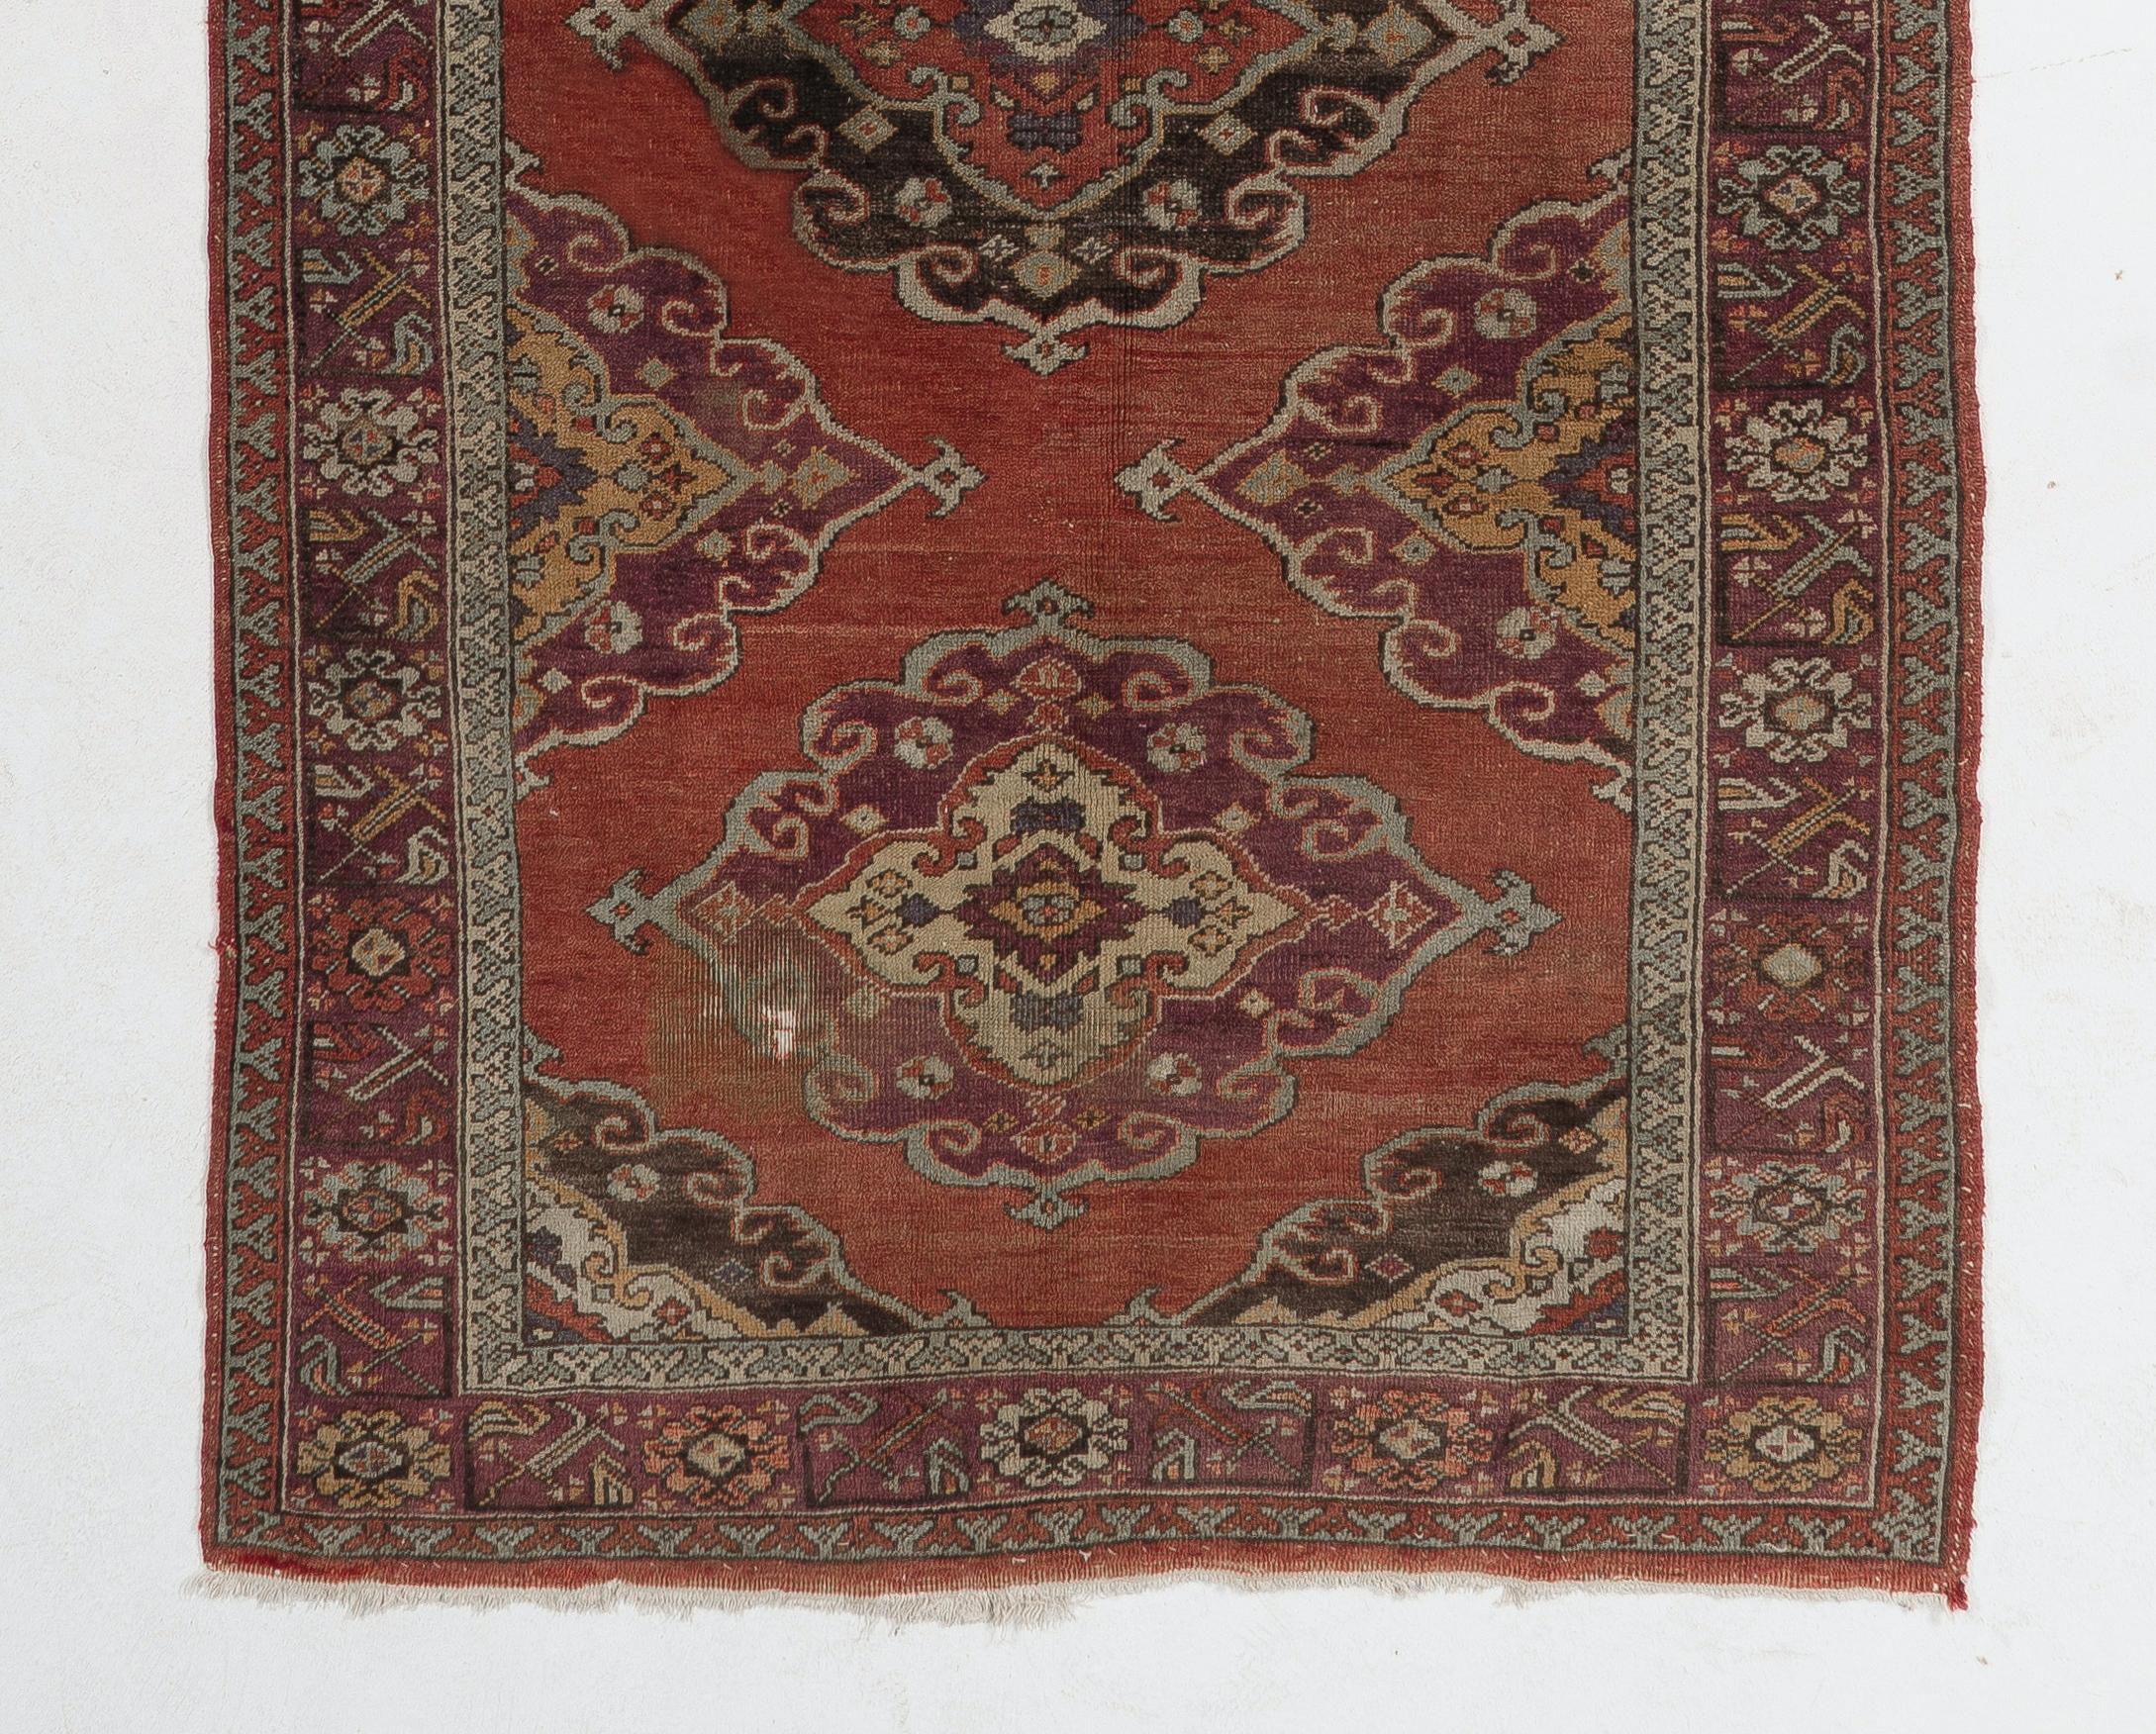 20th Century 5x13.5 Ft Hand-Knotted Vintage Runner Rug, Turkish Tribal Style Corridor Carpet For Sale